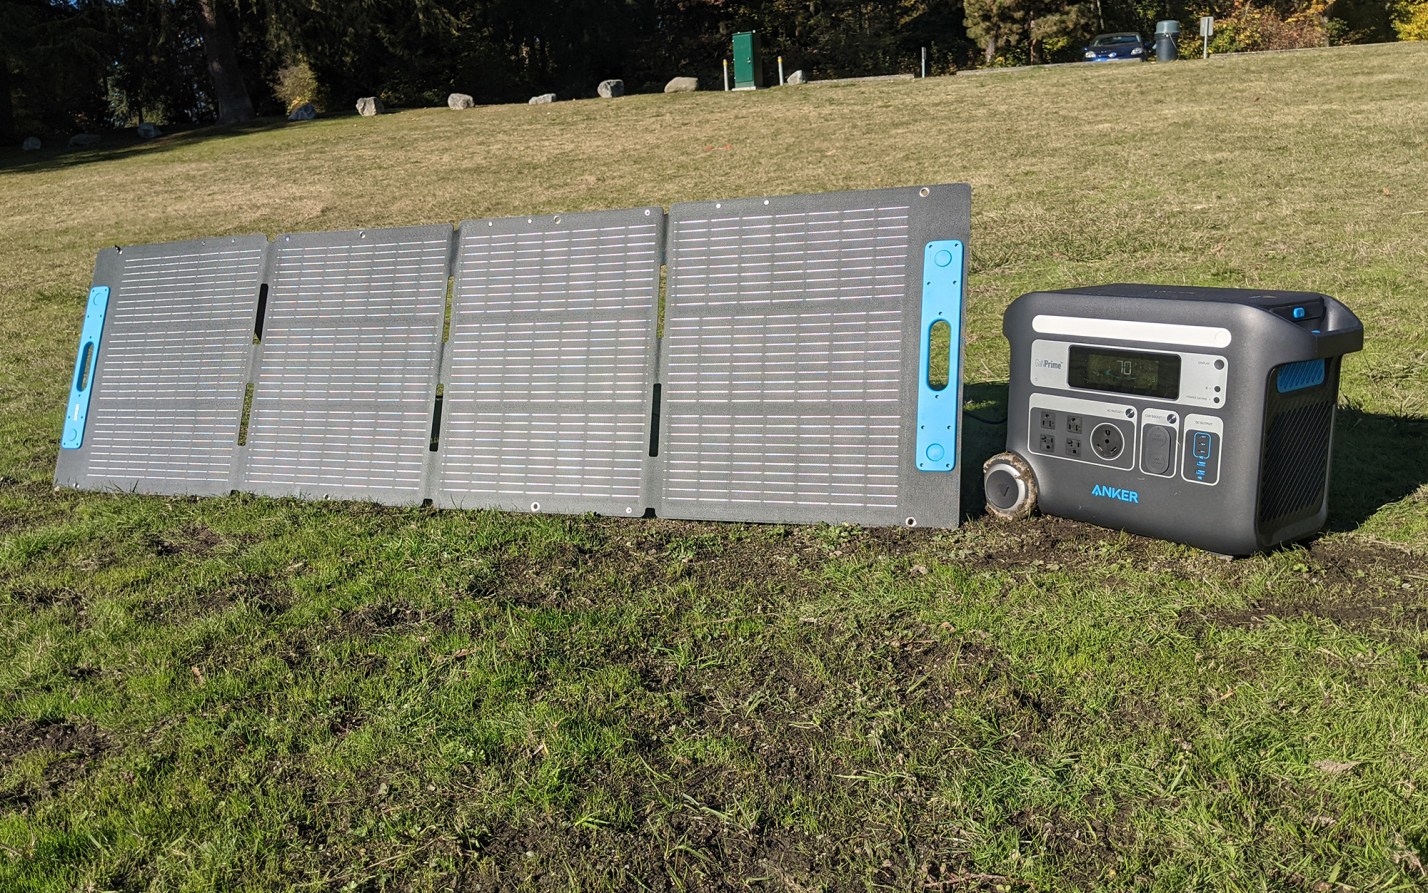 The Anker 555 and 625 Panels sit in the grass.